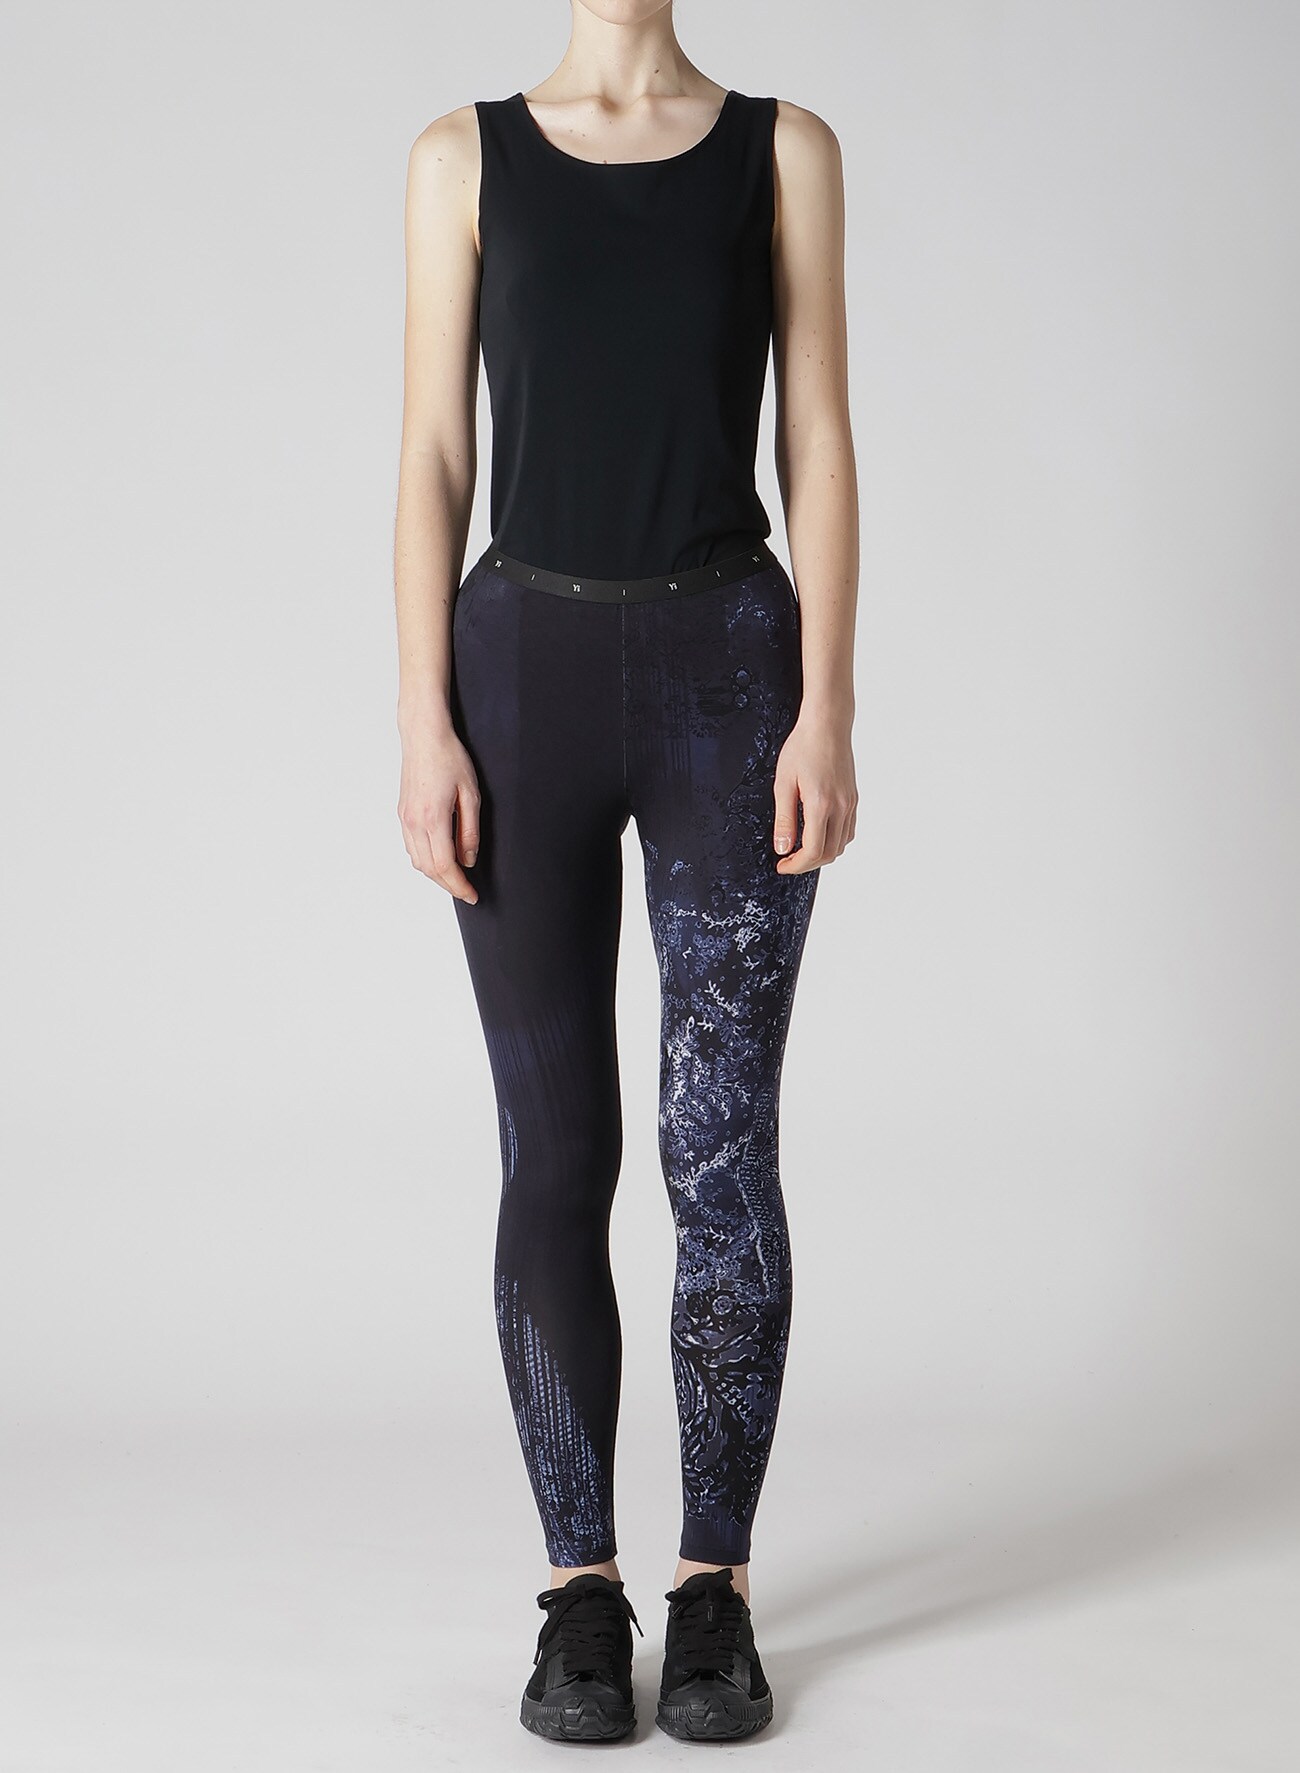 【8/2 12:00(JST) Release】40/-RY JERSEY LACE DESIGN P LEGGINGS